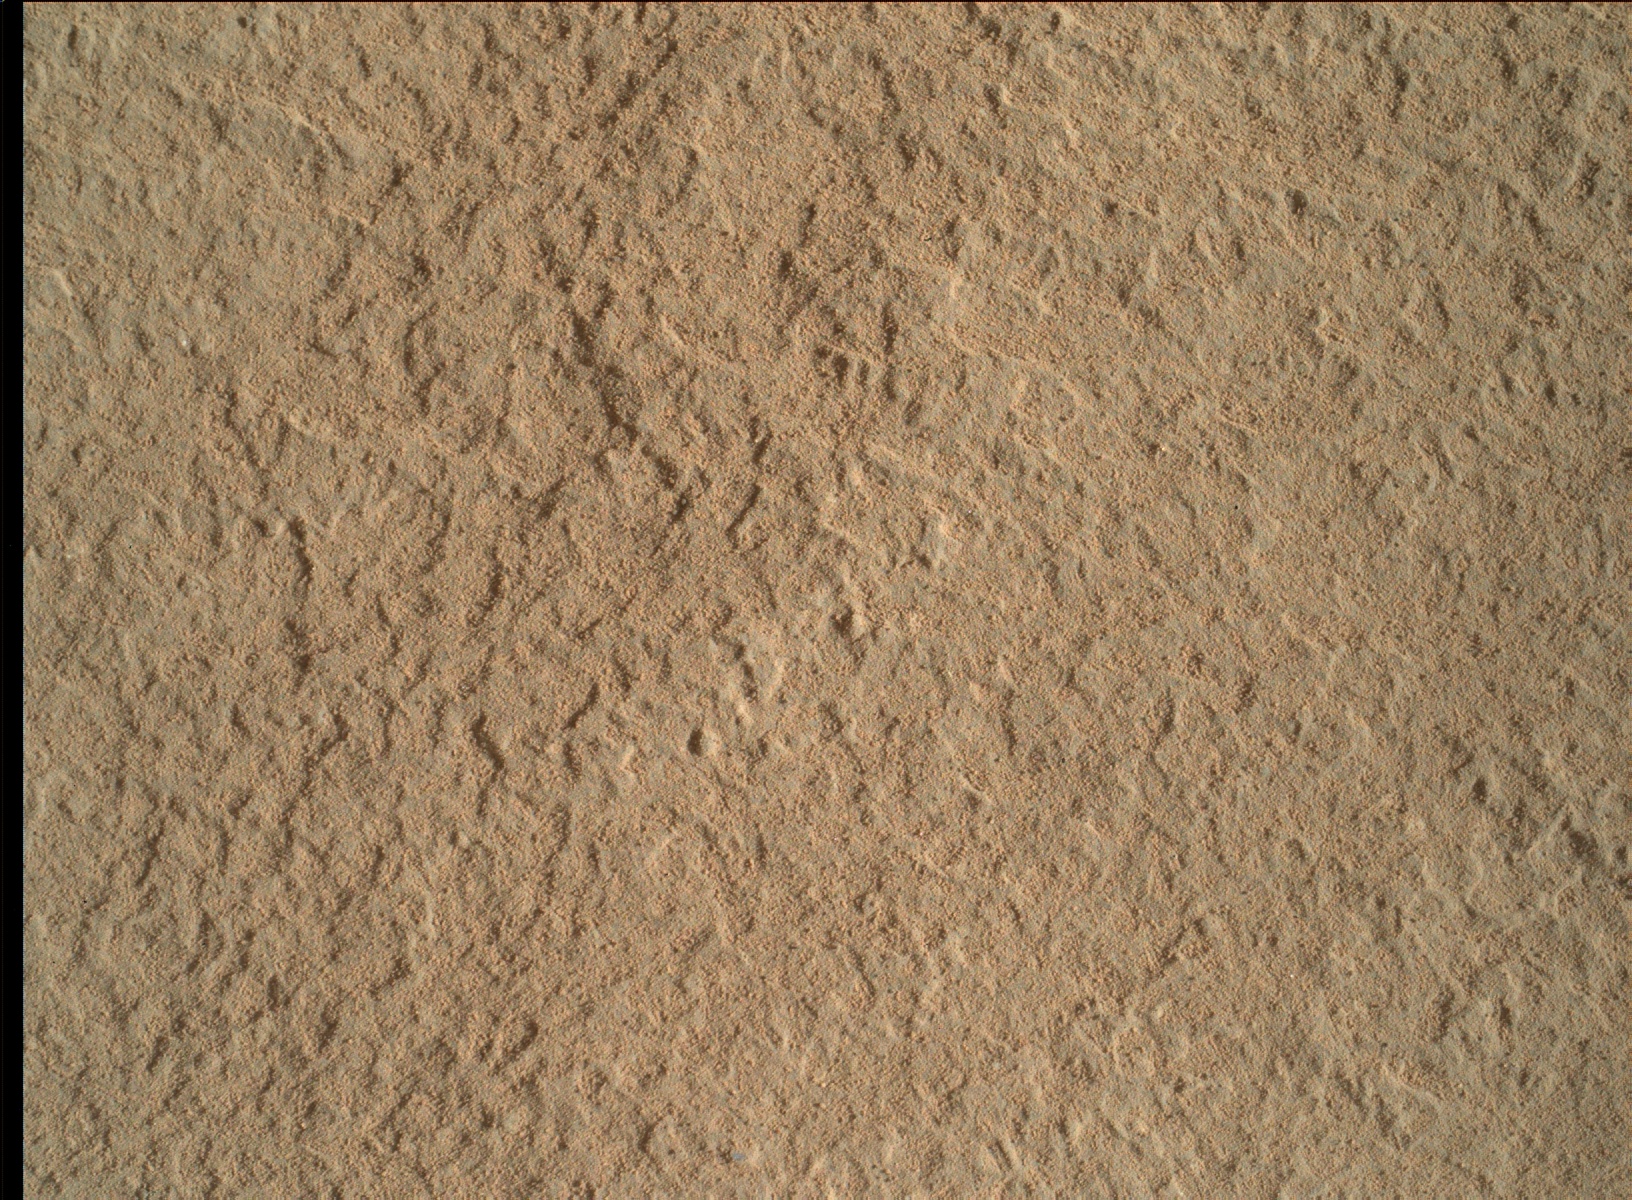 Nasa's Mars rover Curiosity acquired this image using its Mars Hand Lens Imager (MAHLI) on Sol 1109